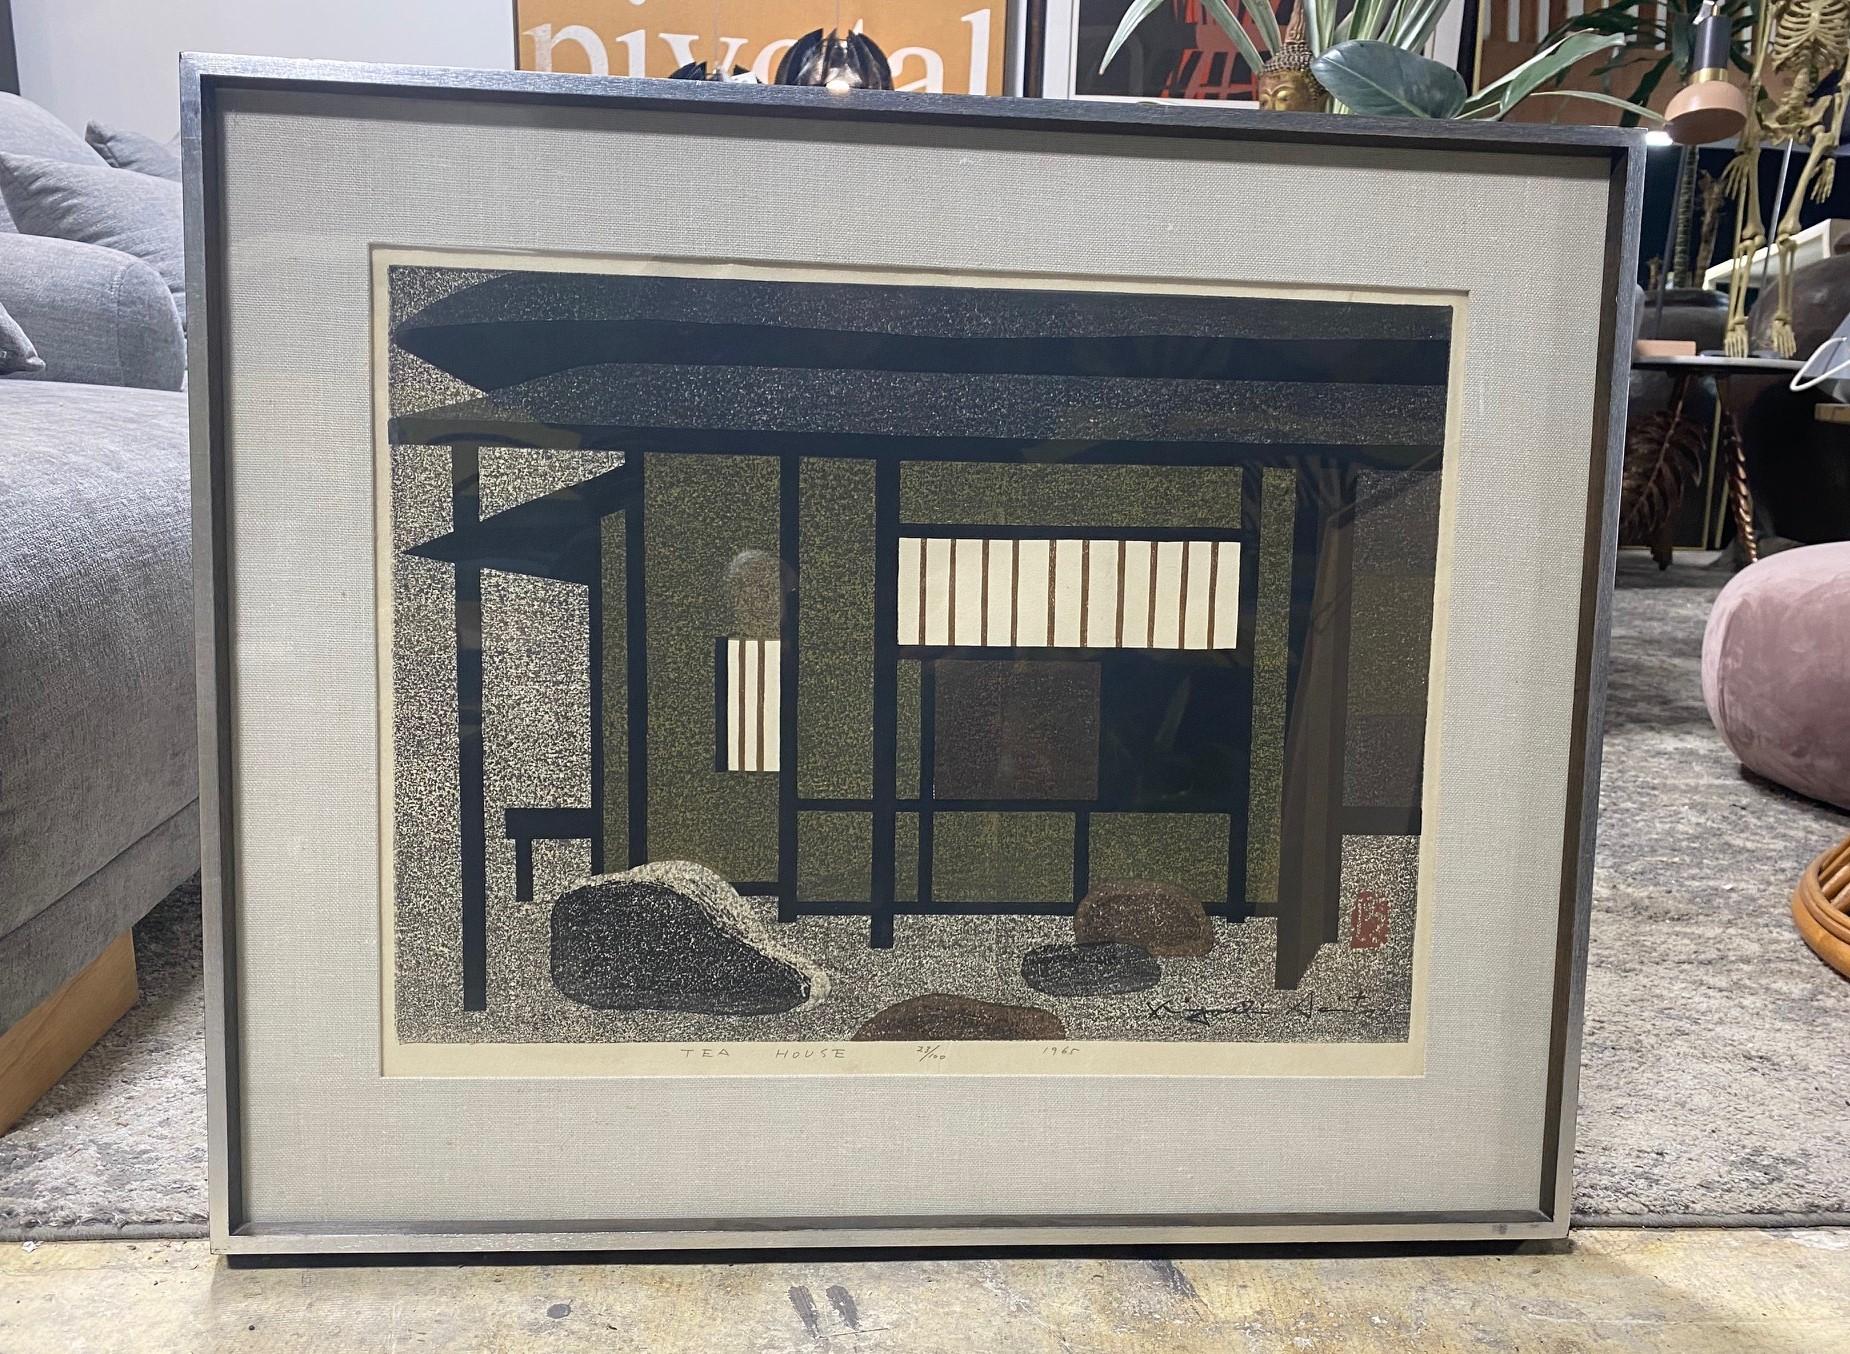 A beautifully designed and composed woodblock print by famed Japanese printmaker Kiyoshi Saito. Many consider Saito to be one of the most important, if not the most important, contemporary Japanese printmakers of the 20th century. This print, which